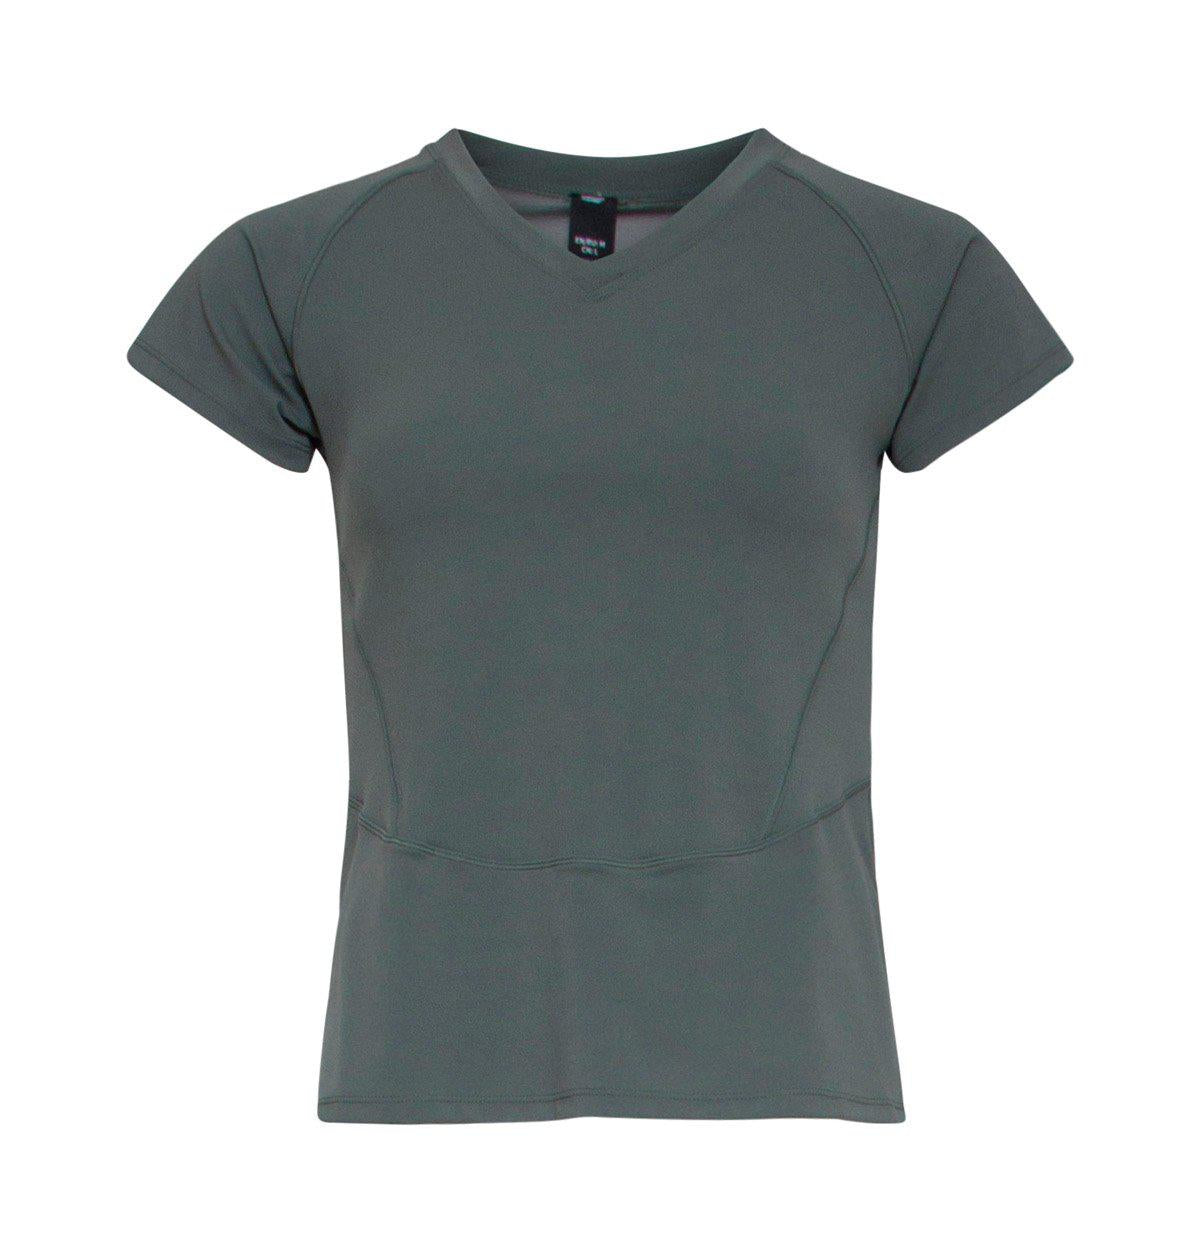 Active Panther - Olive Groen - Laura Sport T-Shirt